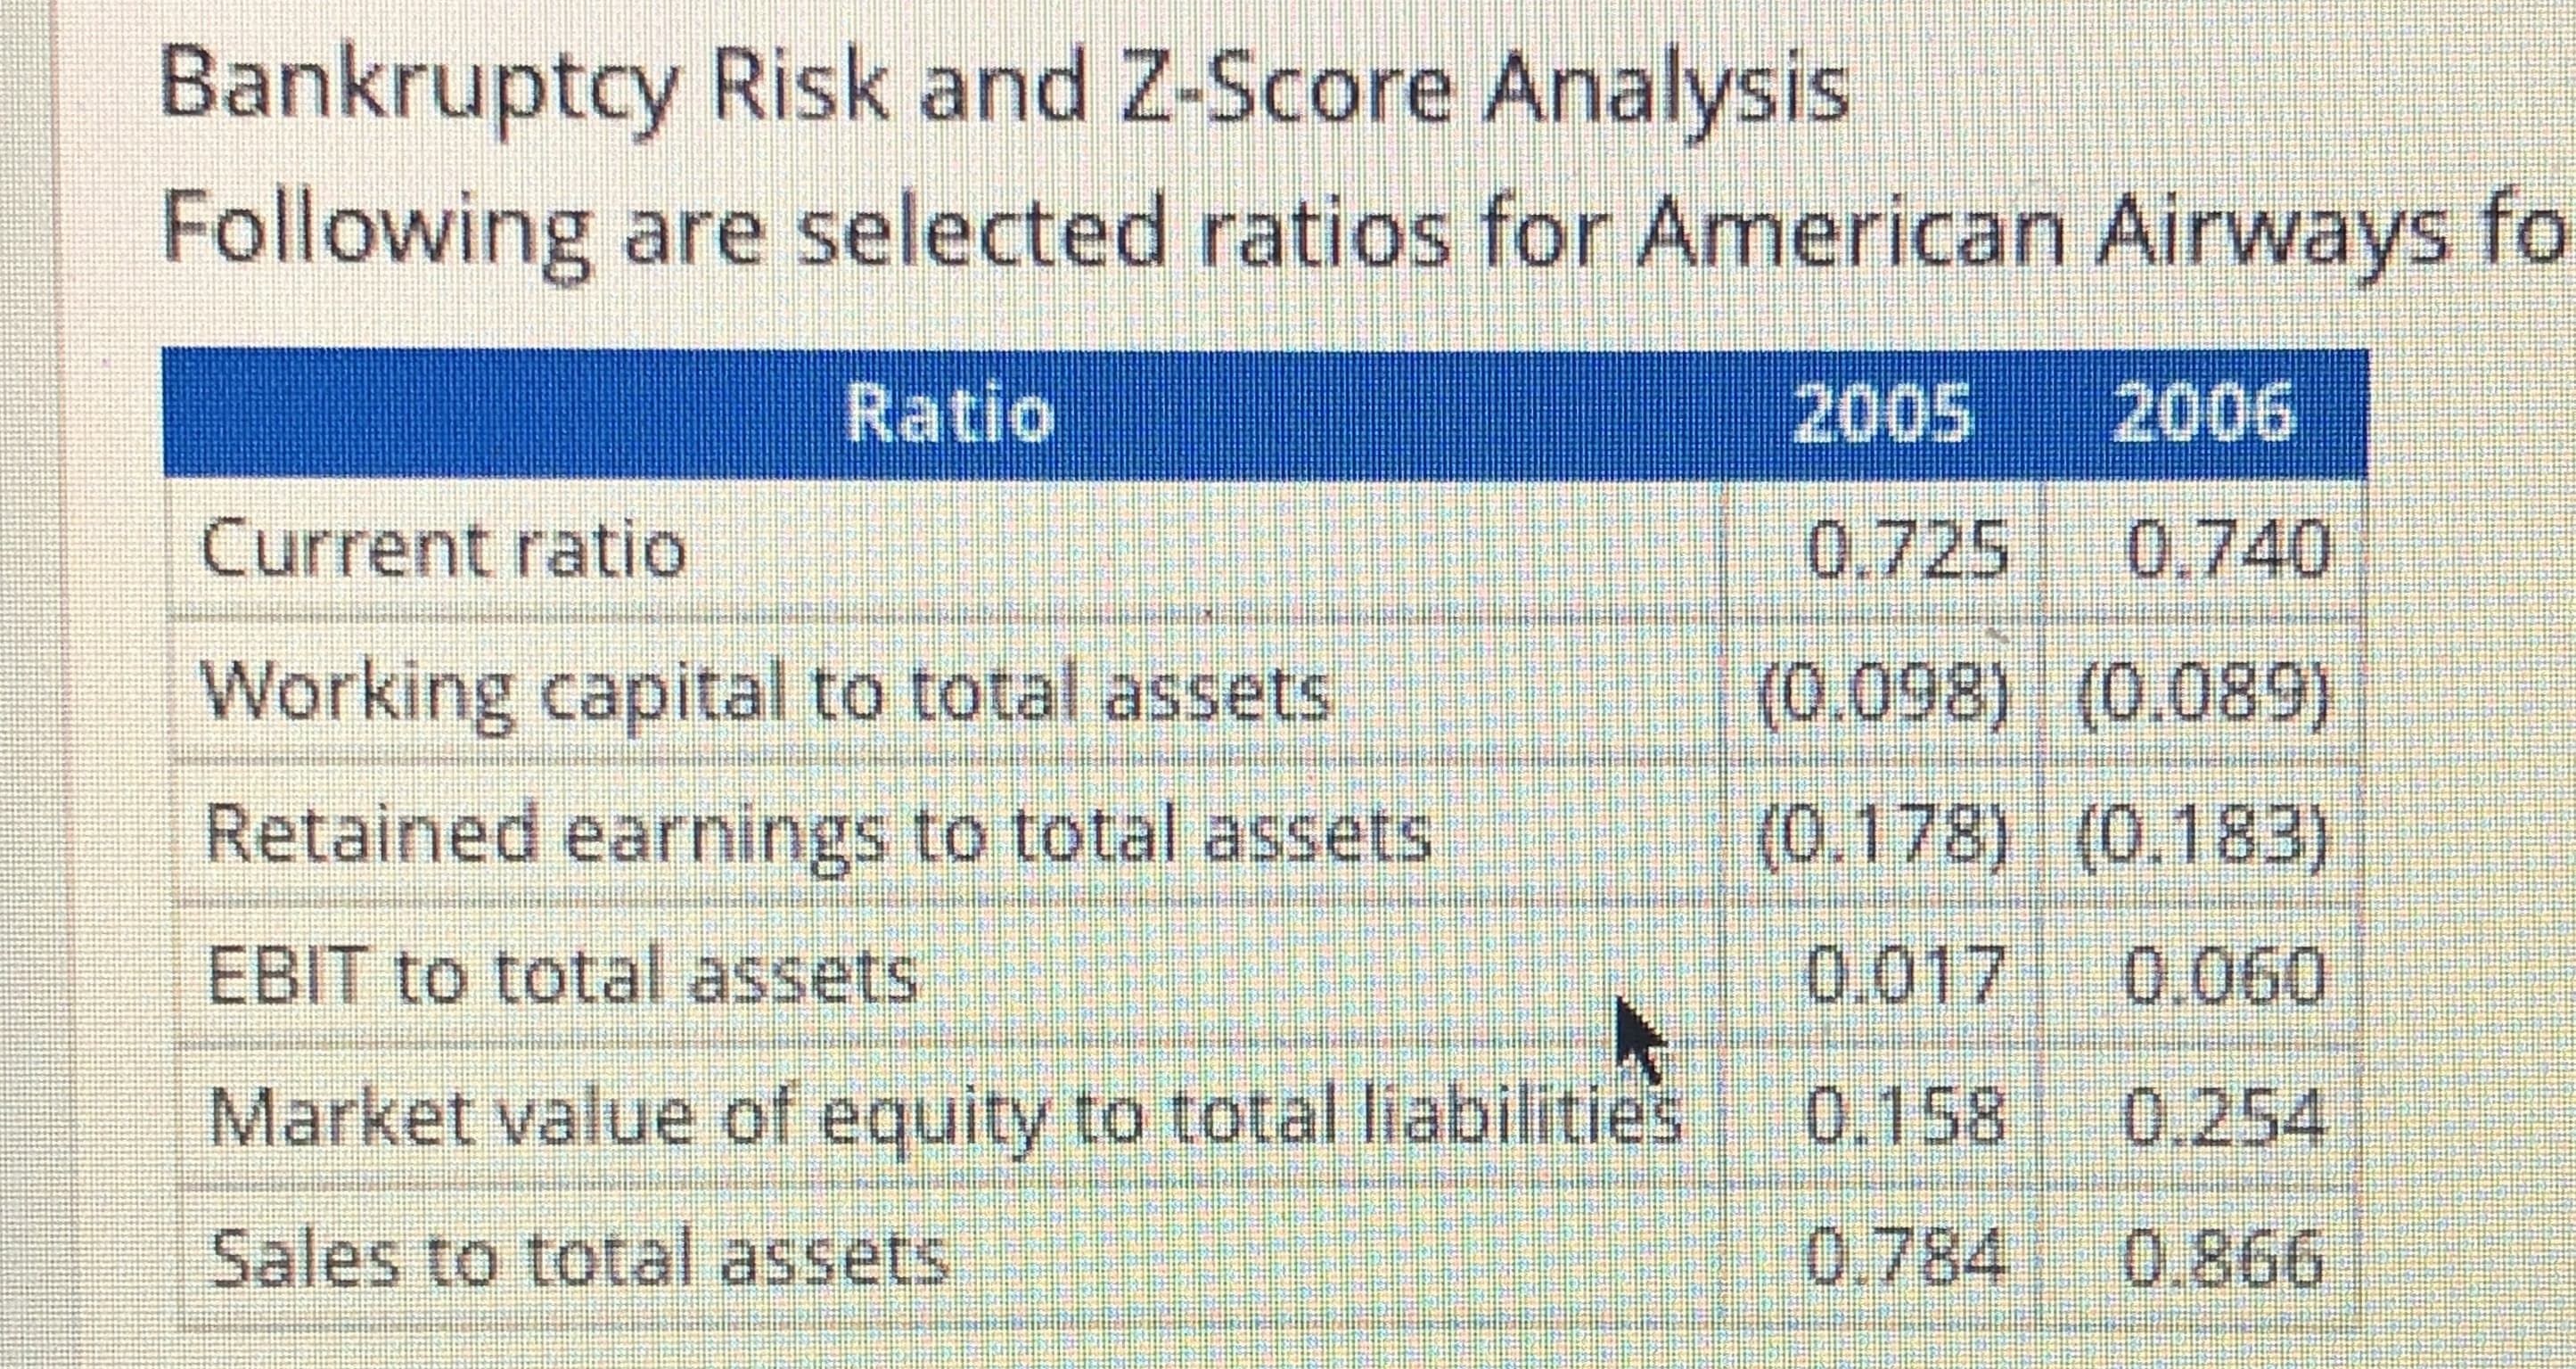 Bankruptcy Risk and Z-Score Analysis
Following are selected ratios for American Airways fo
Ratio
2006
2005
Current ratio
0.725
0.740
(0.098) (0.089)
Working capital to total assets
(0.178) (0.183)
Retained earnings to total assets
0.017
EBIT to total assets
0.060
Market value of equity to total liabilities
0.158
0.254
0.866
0.784
Sales to total assets
